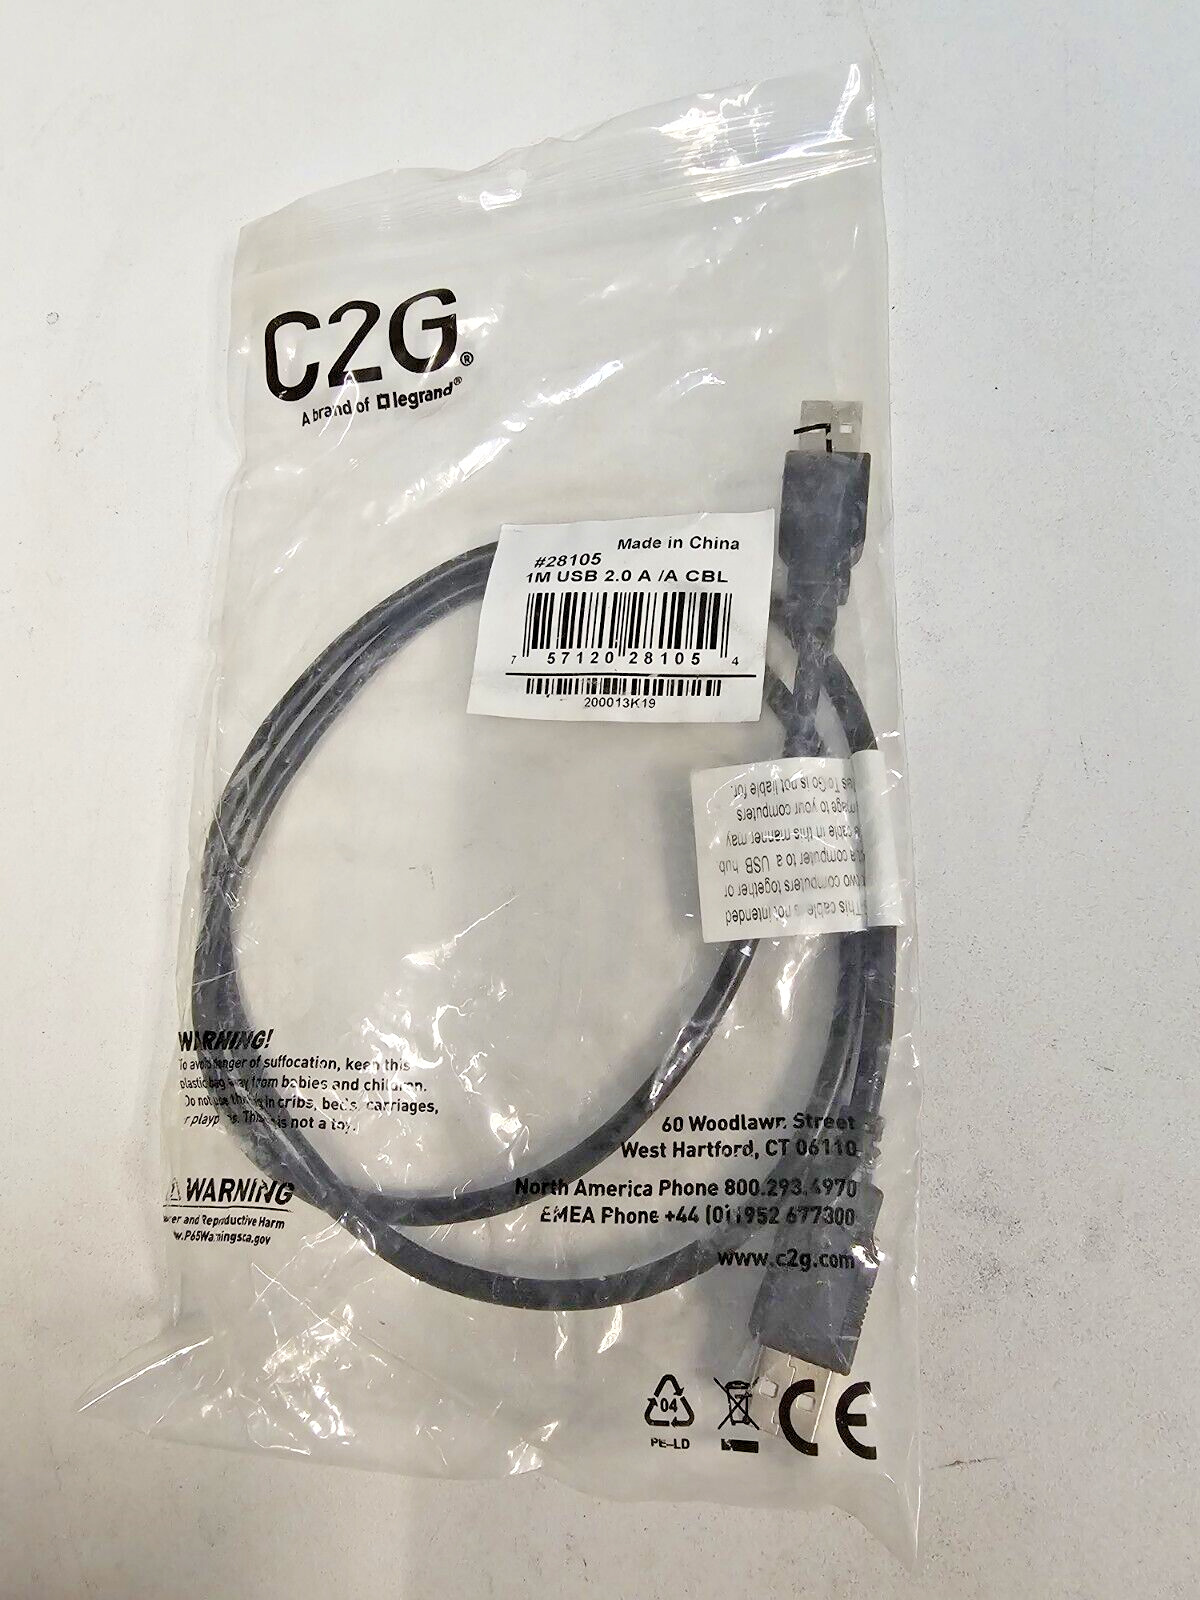 C2G 28105 USB Cable - USB 2.0 A Male to A Male Cable, Black (3.3 Feet, 1 Meter)